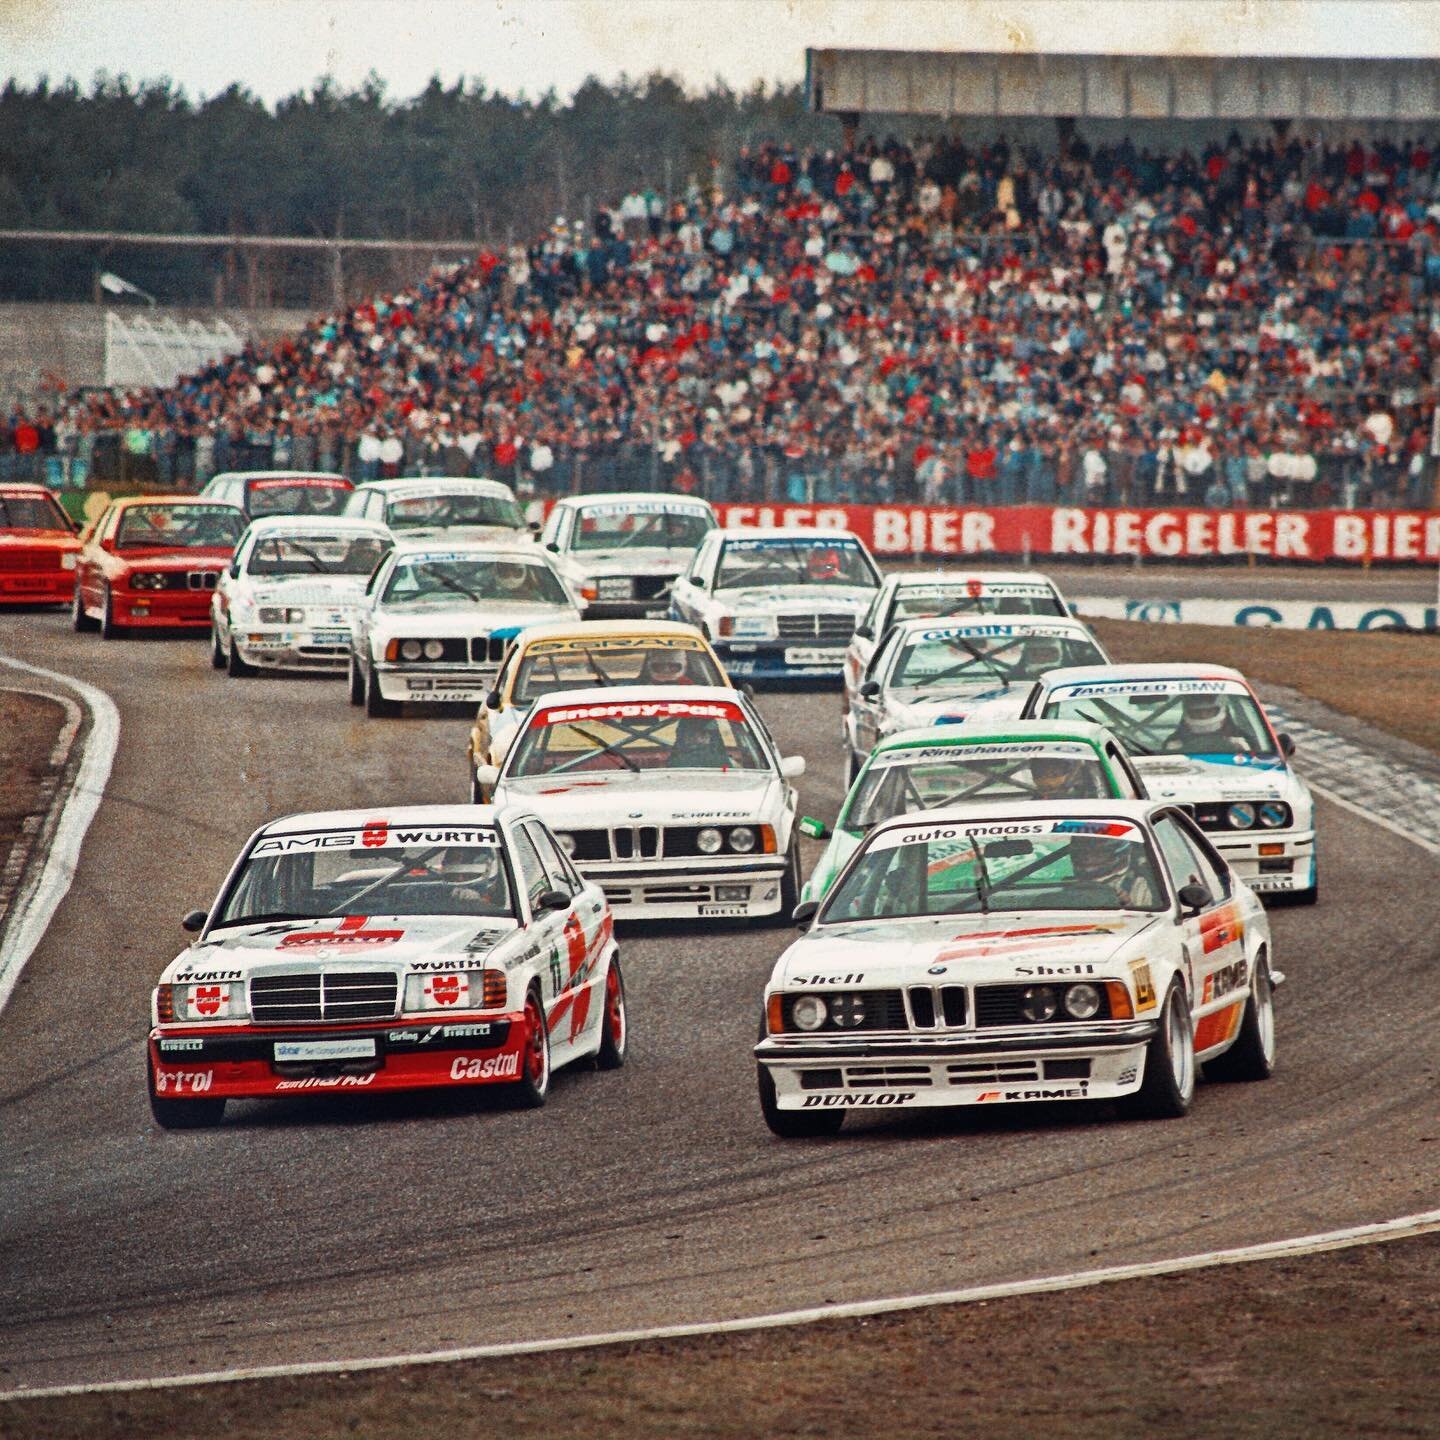 Lights are about to go green for the 1987 AvD Sportwagen-Festival DTM race in Hockenheim. This is Jörg van Ommen (Mercedes 190 E 2.3 16v) and Kurt König (BMW 635 csi).

This race would be the first victory for the BMW M3 in DTM with Harald Grohs (V